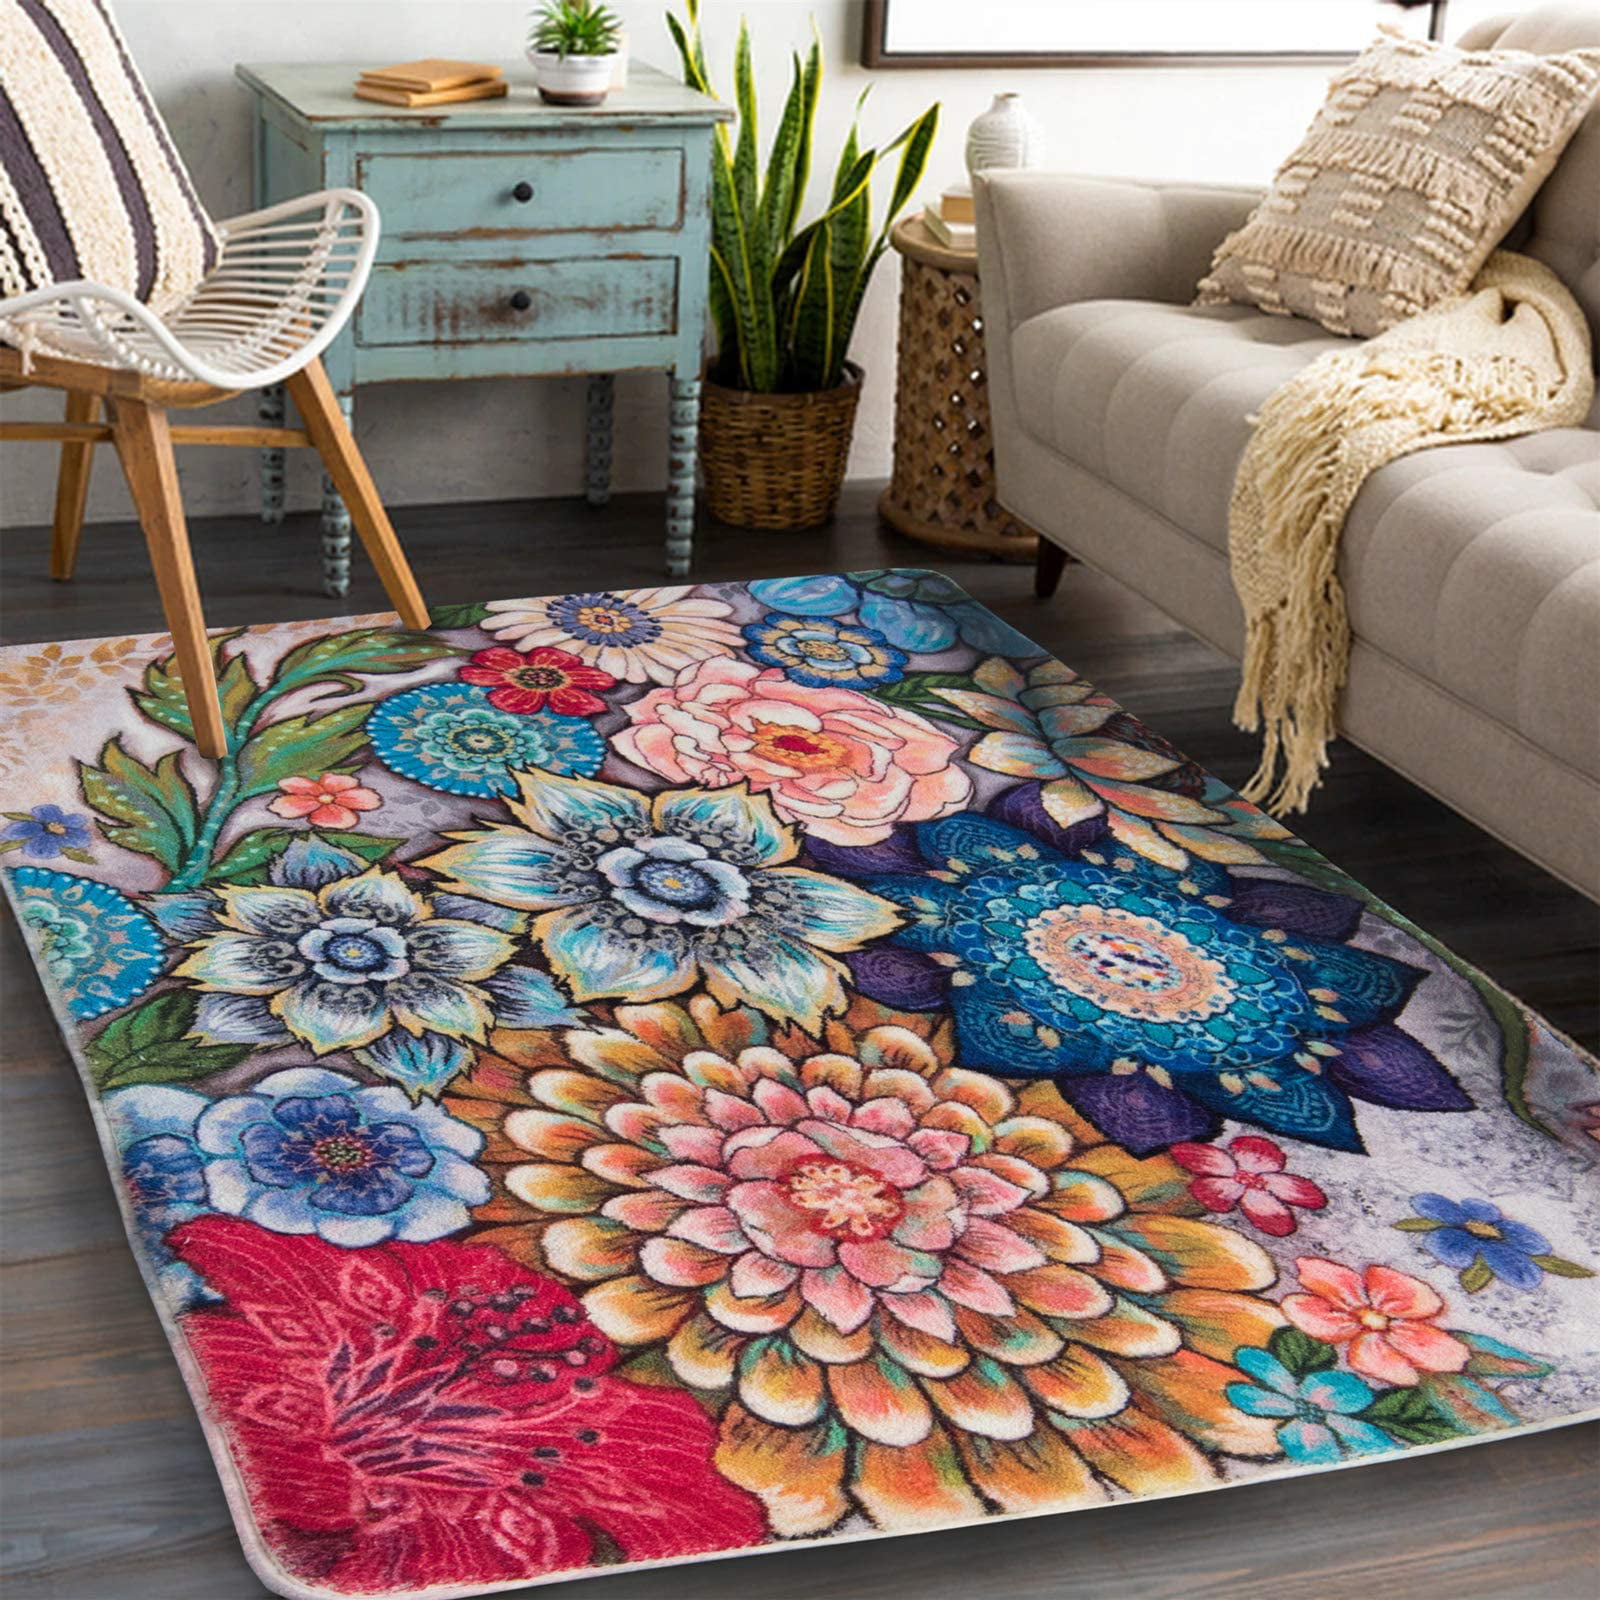 Large Area Rugs Flower Cute Printed Modern Floor Carpet No-Shedding Non-Slip Indoor Rug Home Décor 5' x 3'2